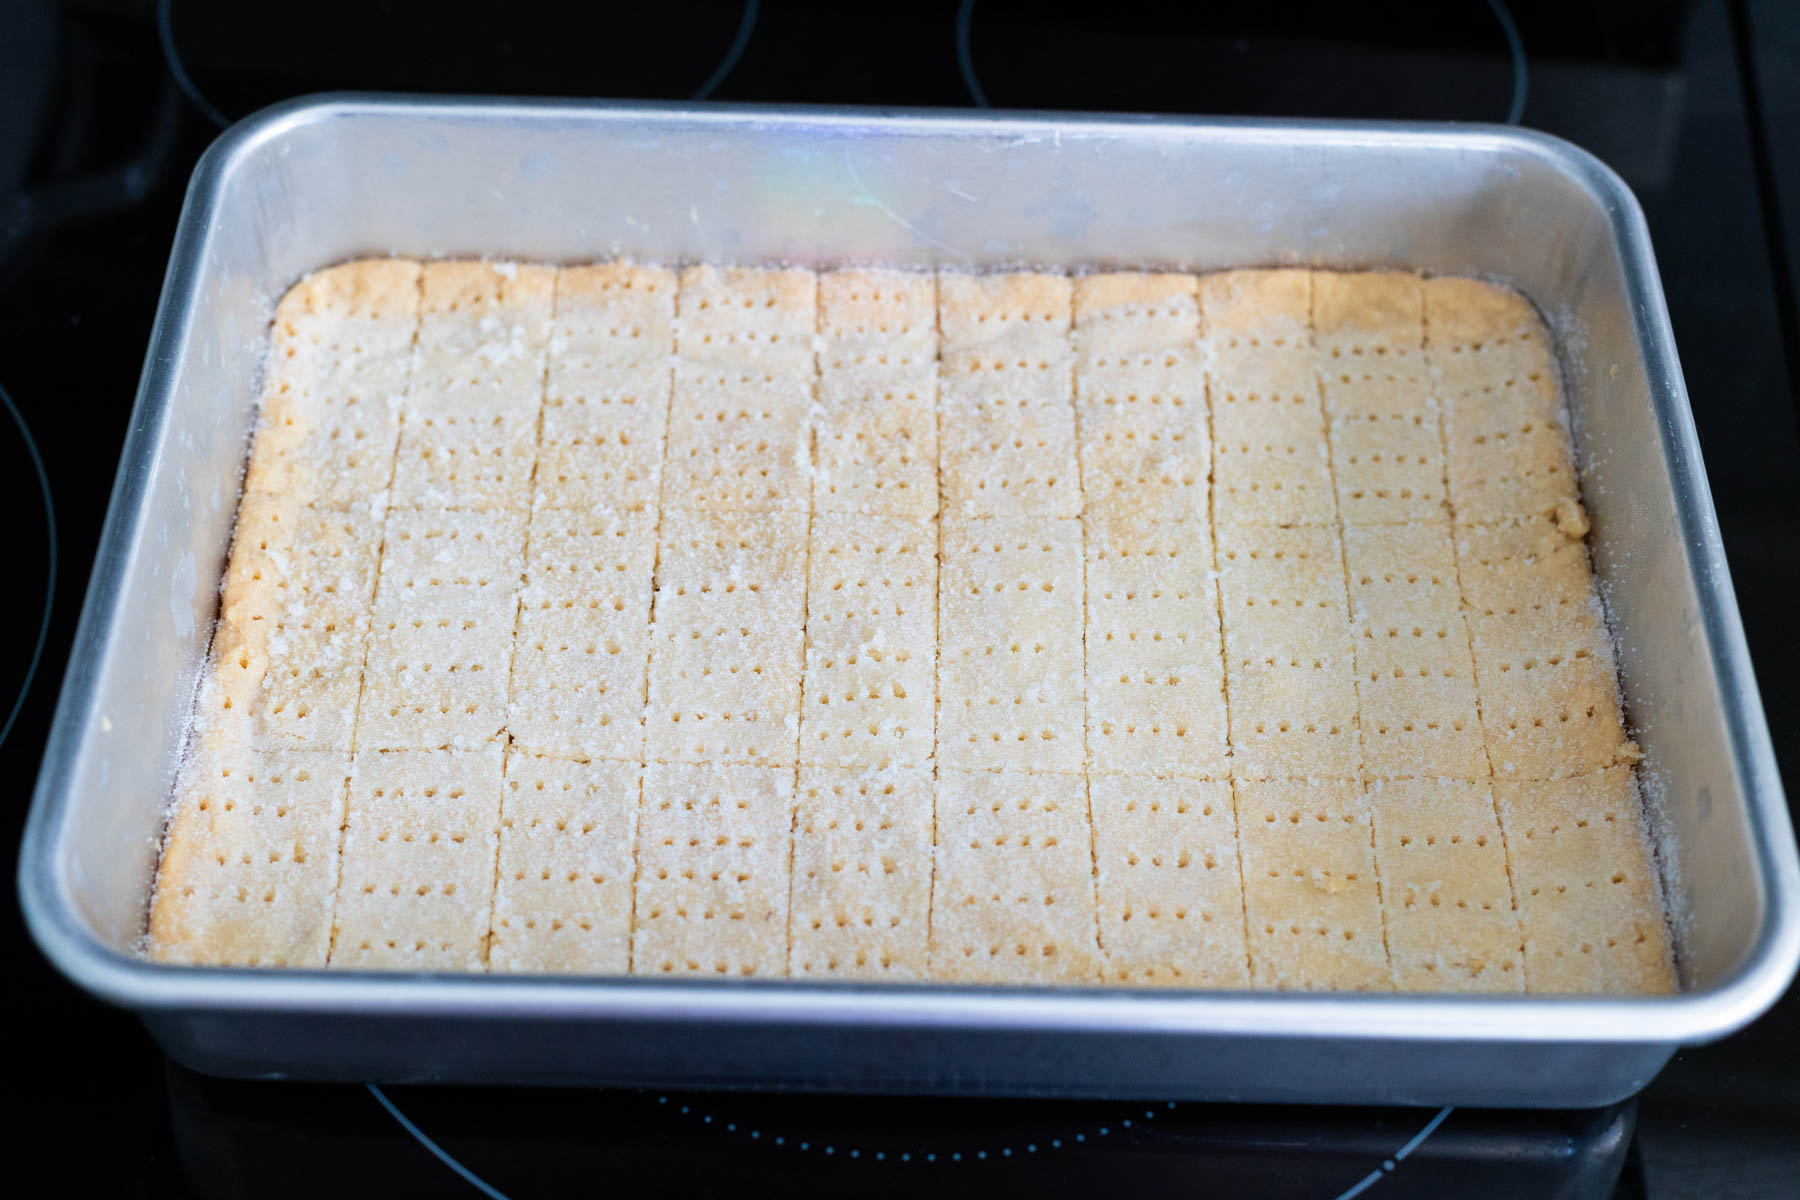 The pan of shortbread has been neatly pricked with a fork to make a pretty pattern.